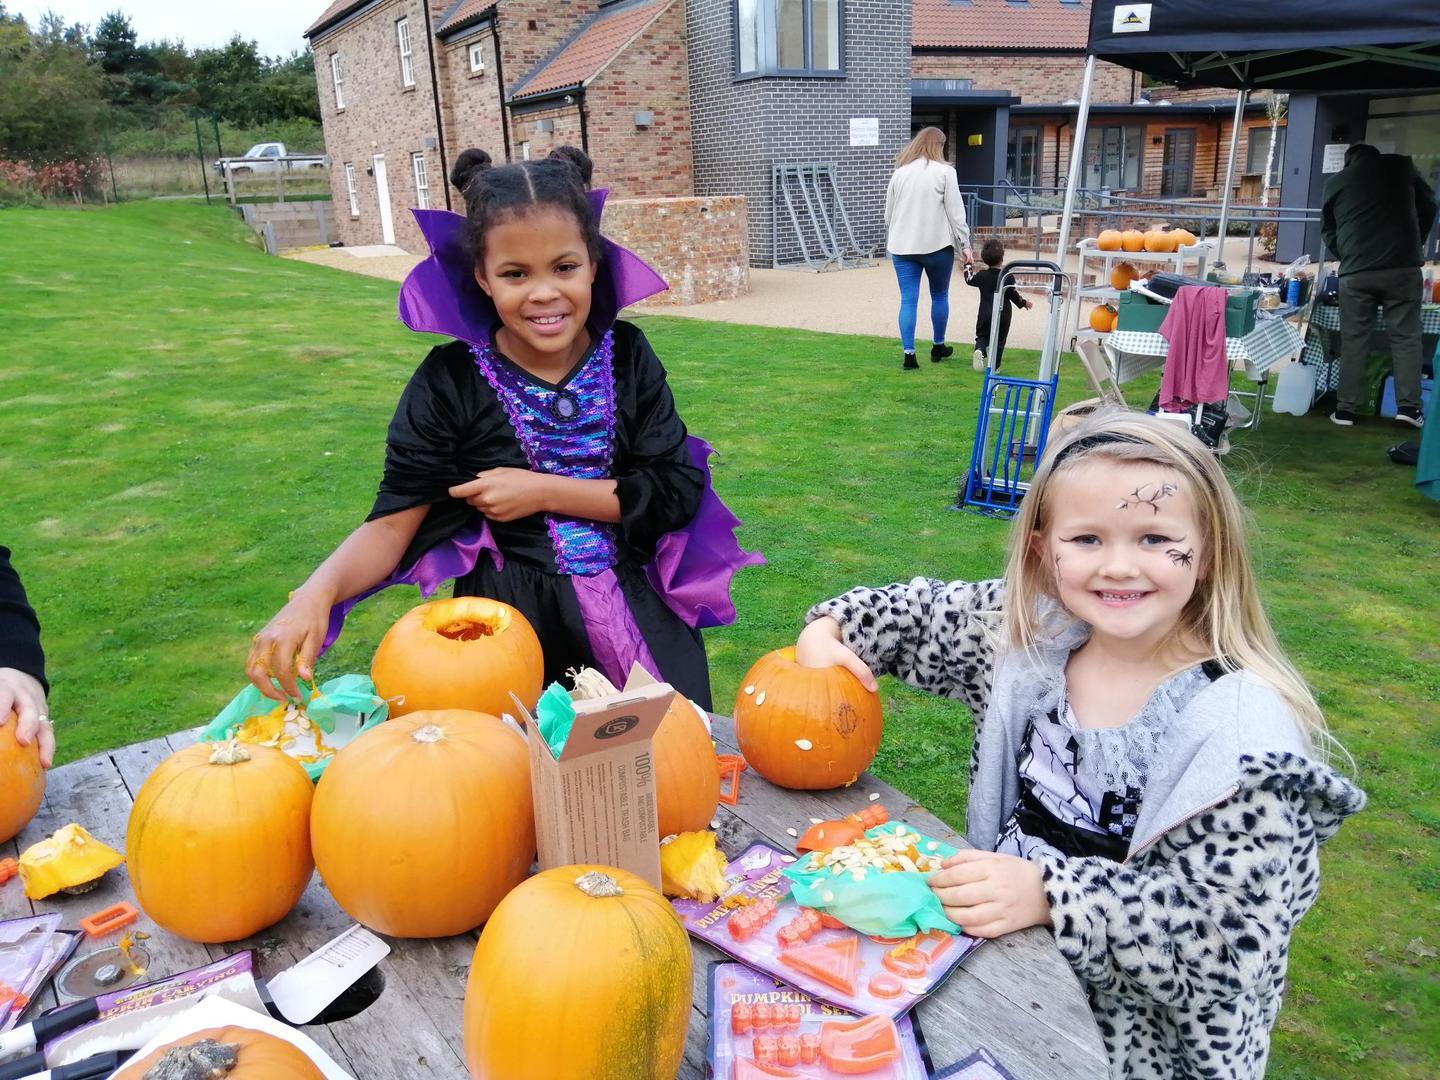 Pumpkinfest 2022 - FREE family fun day at Allerton Waste Recovery Park, Knaresborough, North Yorkshire, United Kingdom